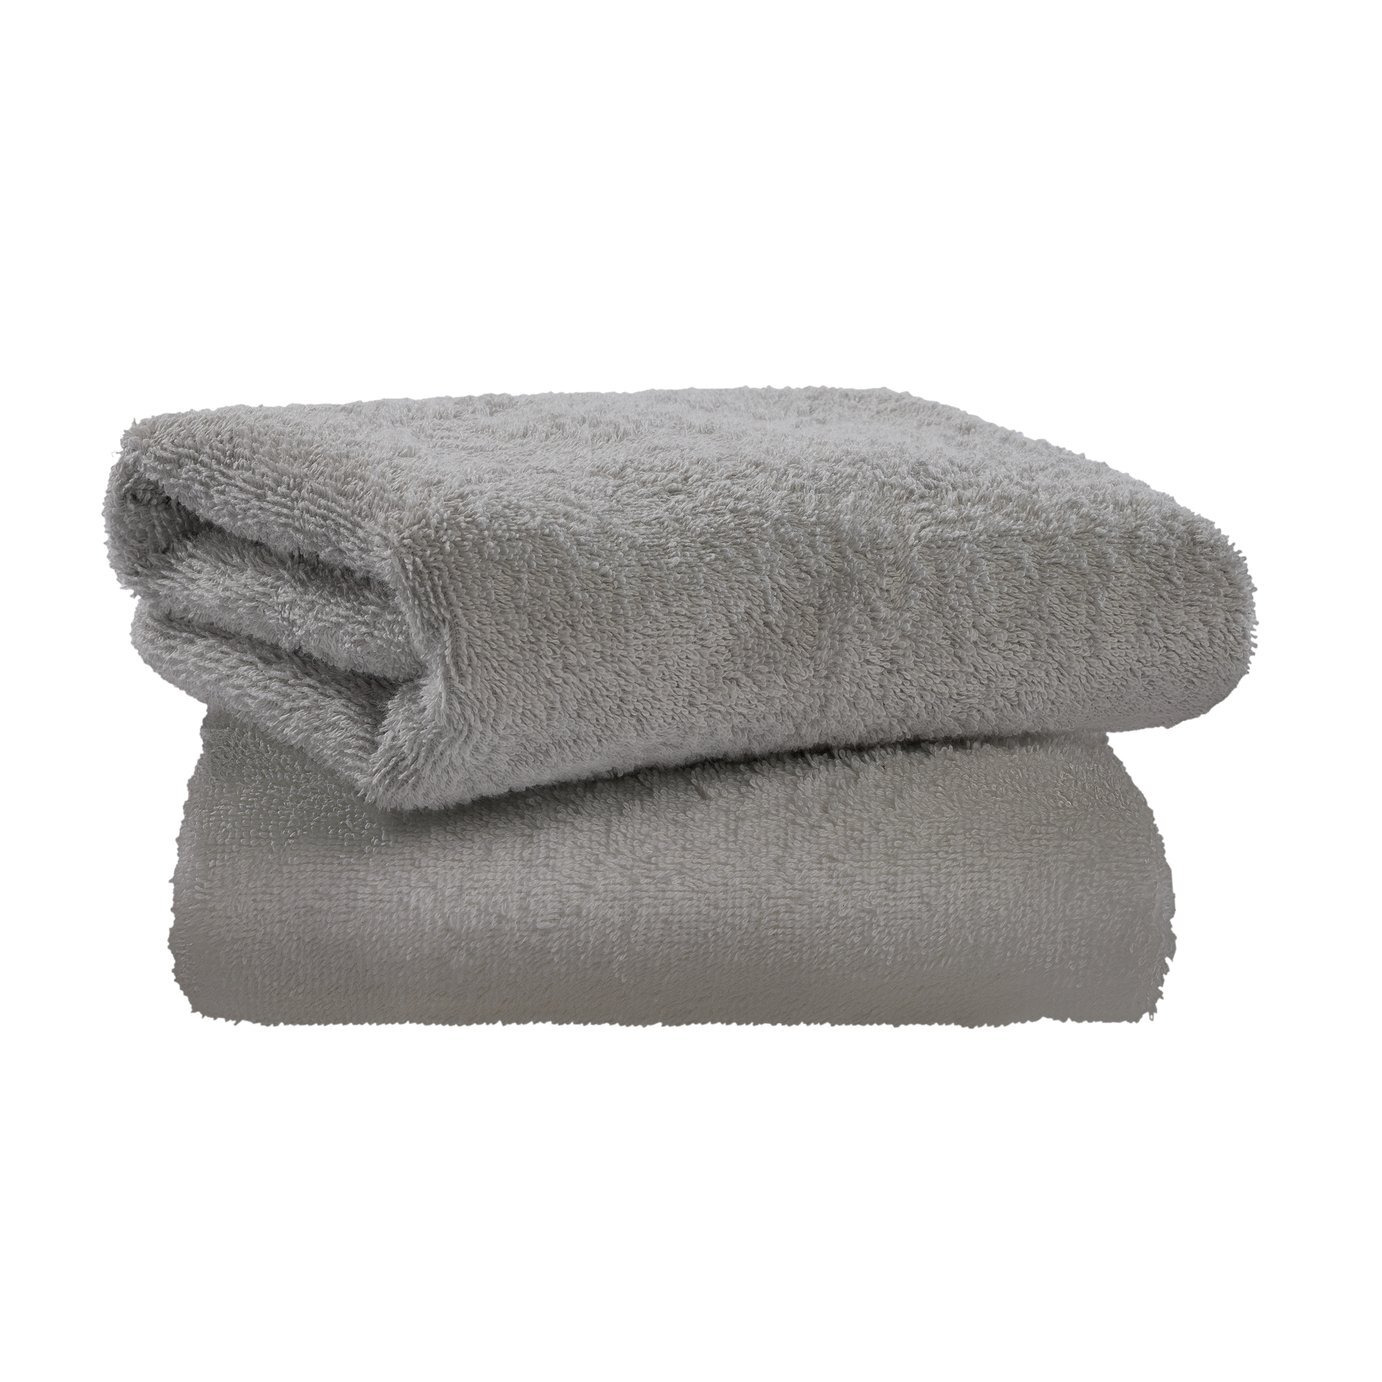 Argos Home Plain 2 Pack Hand Towels - Grey - image 1